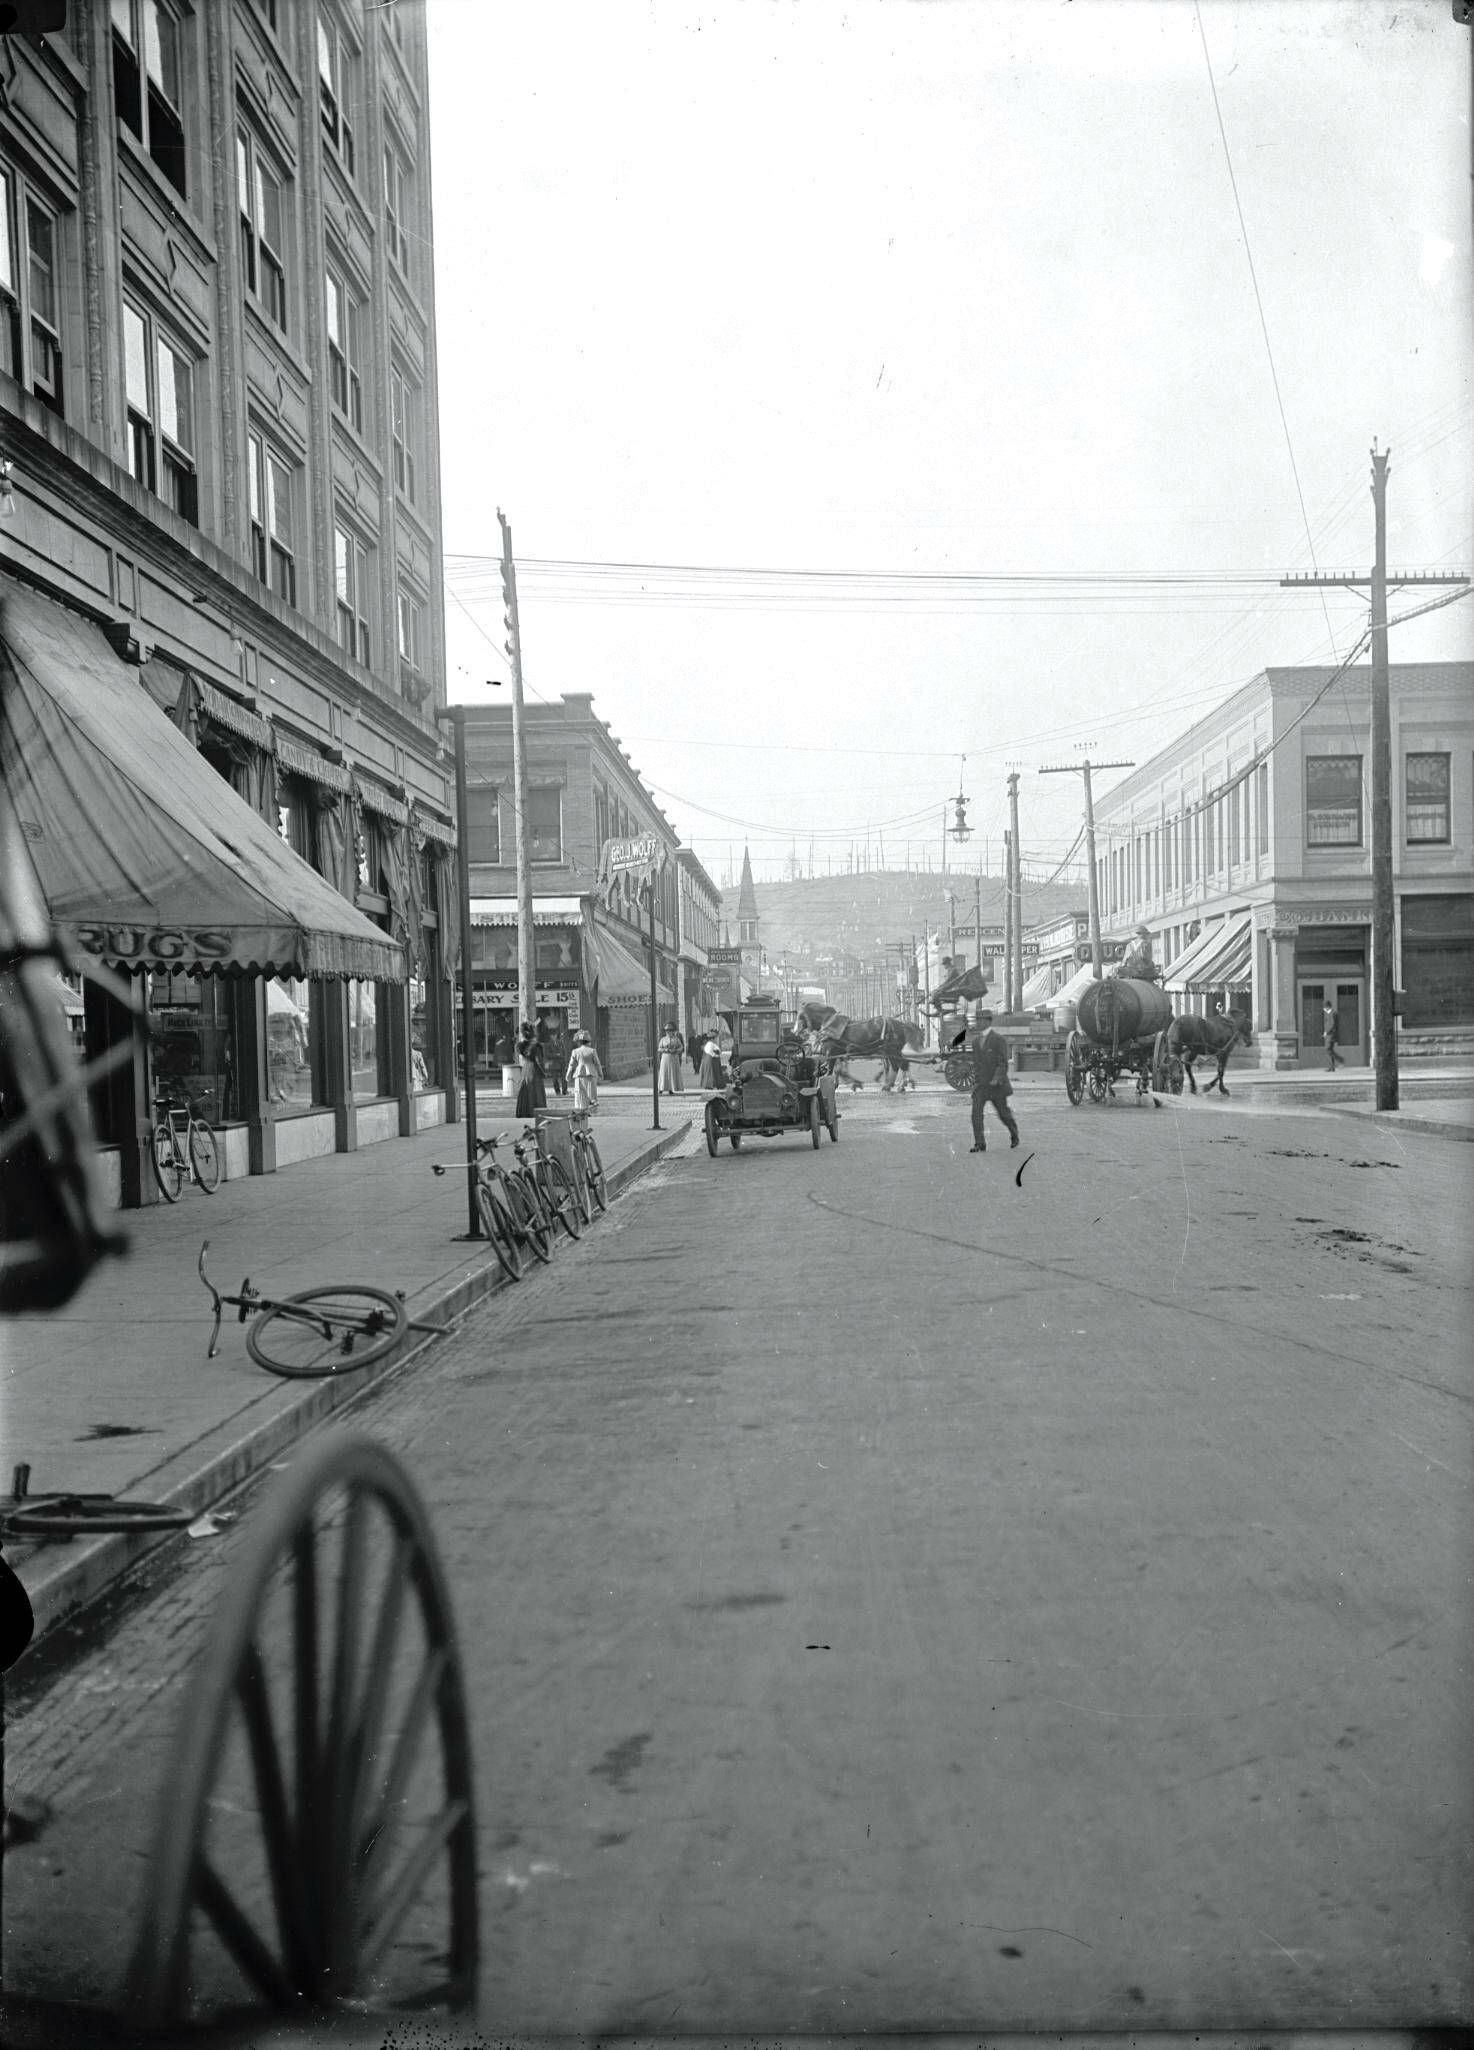 Polson Museum
This archival photo shows various modes of transportation near the intersection of East Heron and South H St., circa-1910. You can see bicycles, horse-drawn vehicles, and early street sweeper and an automobile. This is part of Polson Museum’s new centerpiece exhibit titled “The Spectacular Vanishes: When Horses Left the Harbor.”